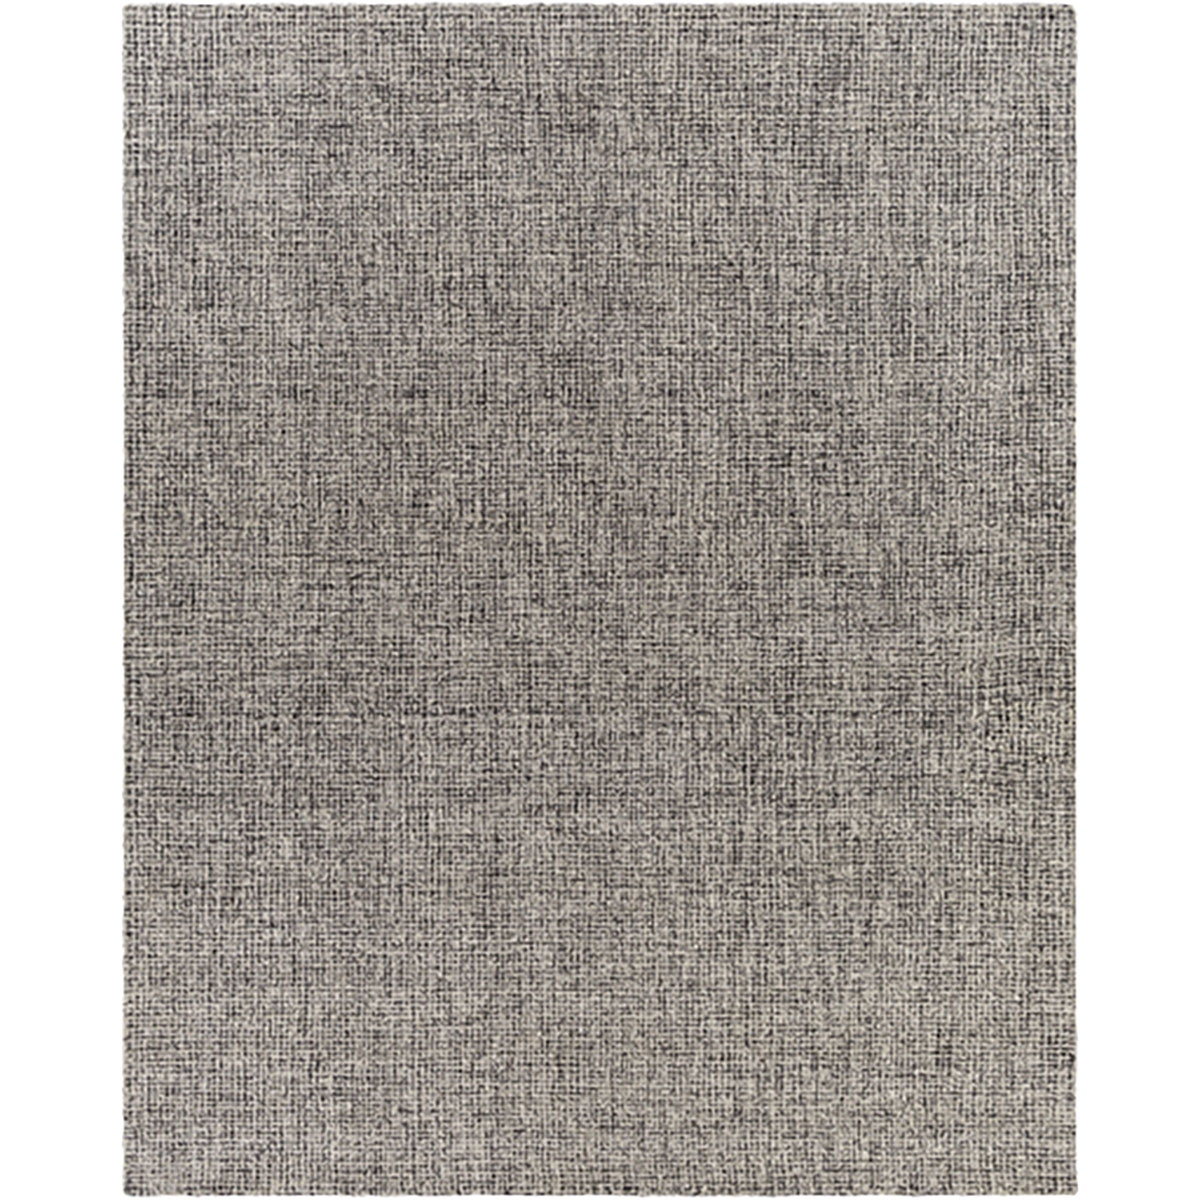 Picture of AIDEN 1002 8'X10' RUG